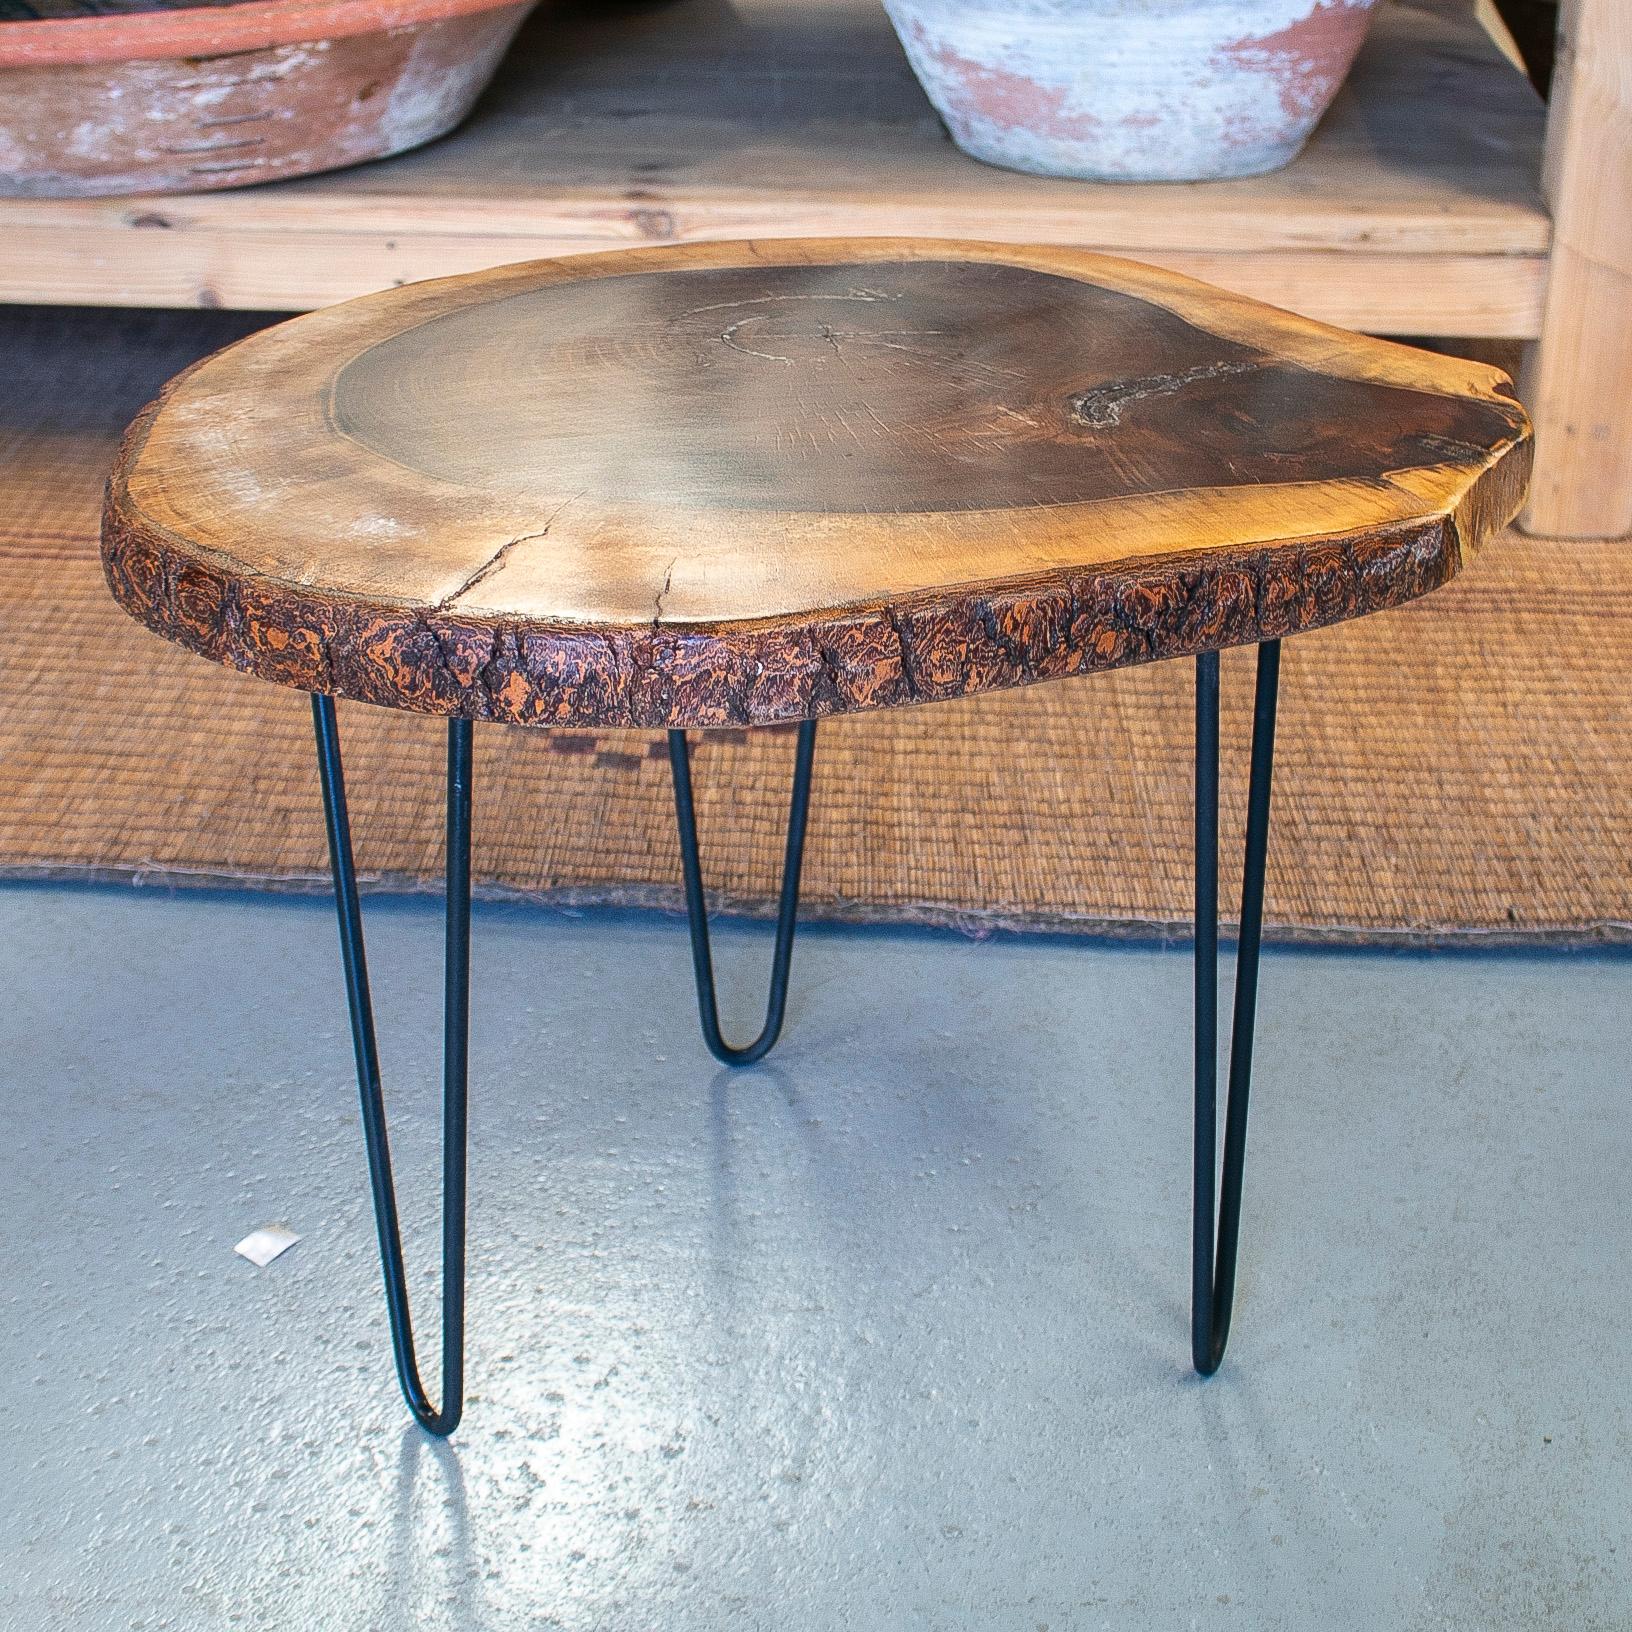 Rustic Spanish natural sliced tree trunk side table with iron legs.